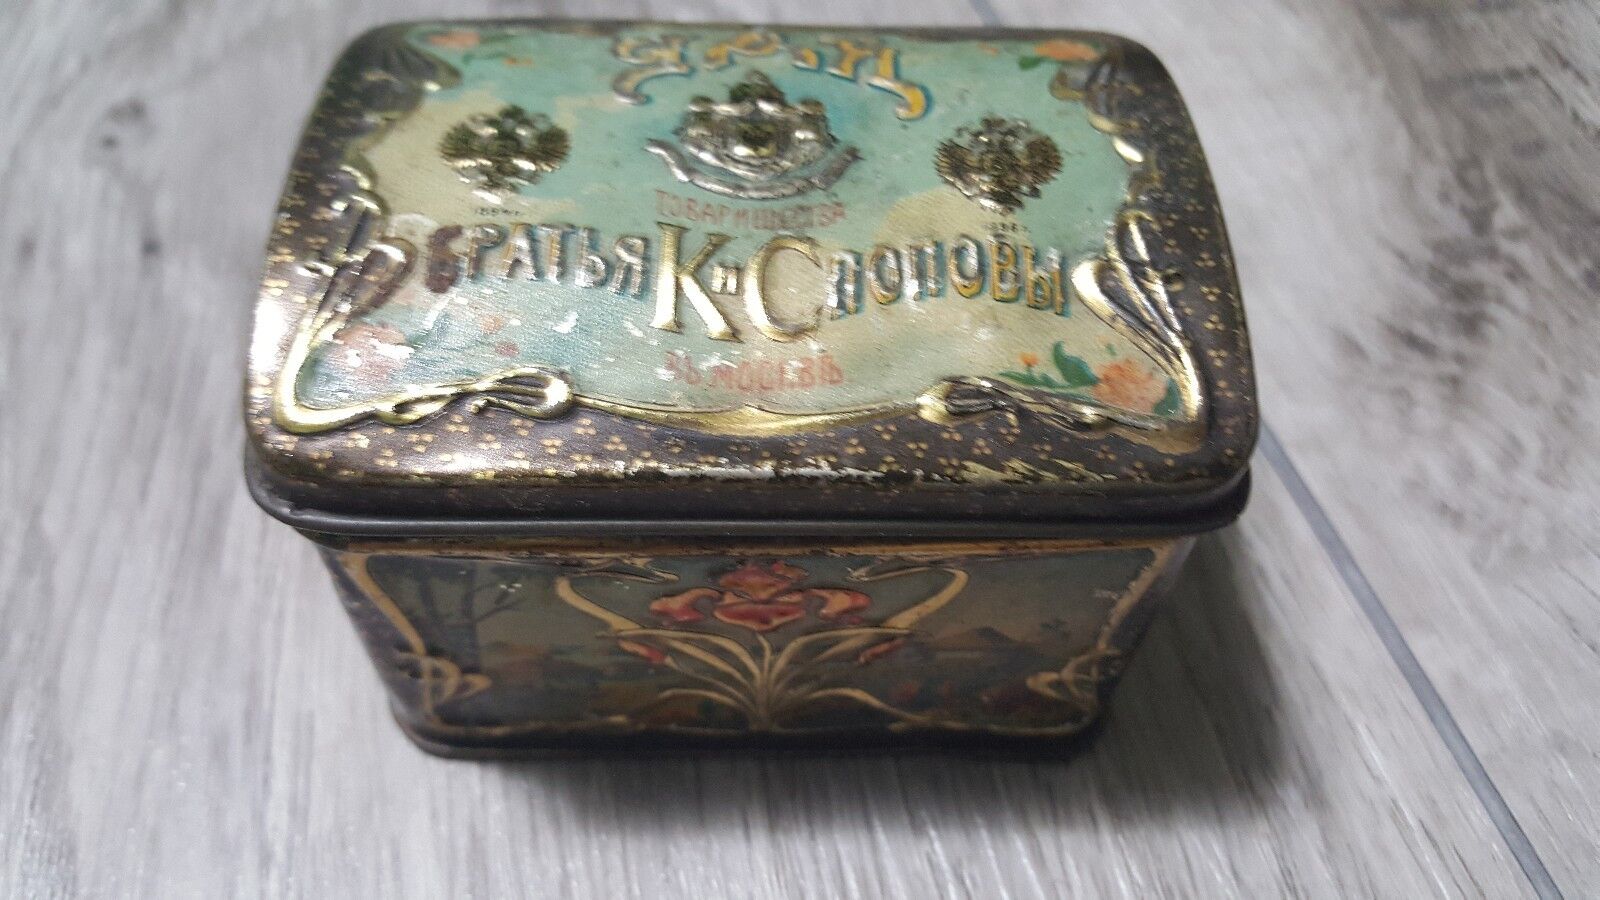 Antique ca. 1910 Russian Popov Brothers Tea Caddy Box hand painted TIN VINTAGE